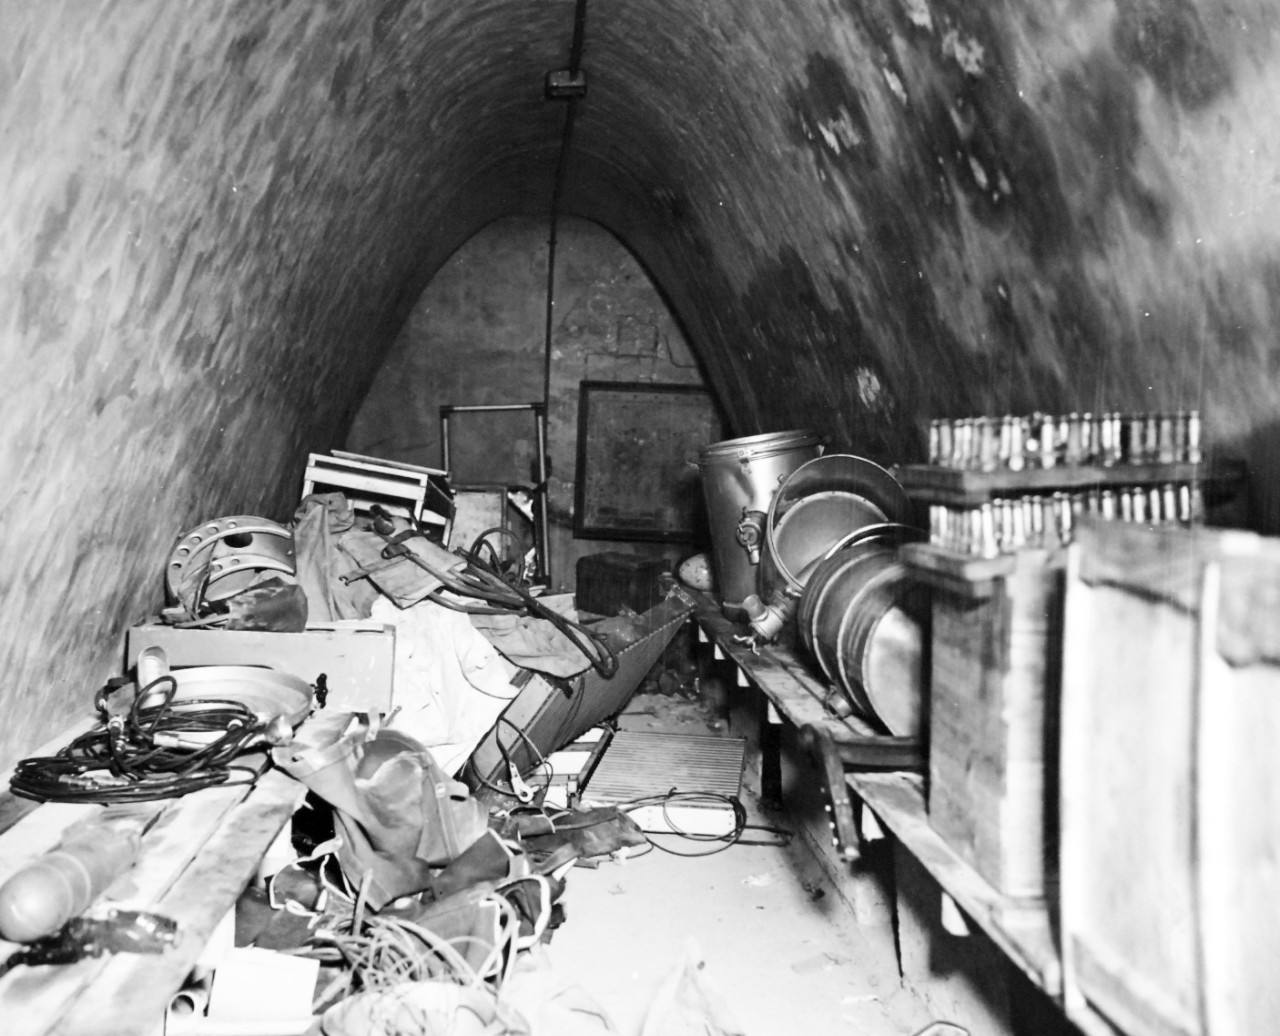 80-G-307832:  Invasion of Saipan, June-July 1944.  Interior of Japanese aviation fuel storage shelter.   Photograph received March 20, 1945.      Official U.S. Navy Photograph, now in the collections of the U.S. Navy.  (2017/04/11).  